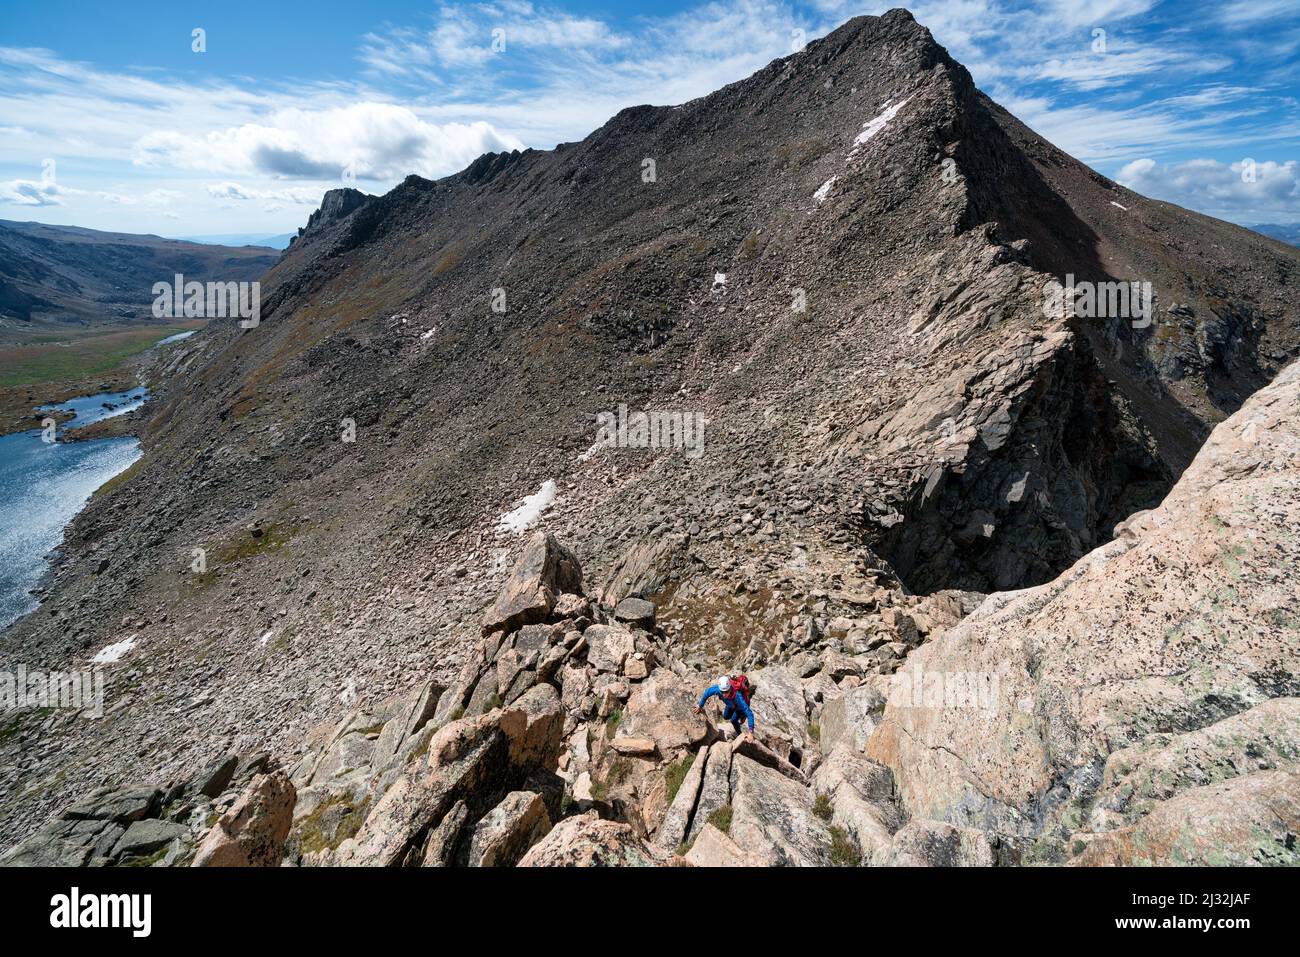 Climbing Mt. Evans with Mt. Bierstadt in the background, Colorado, USA Stock Photo